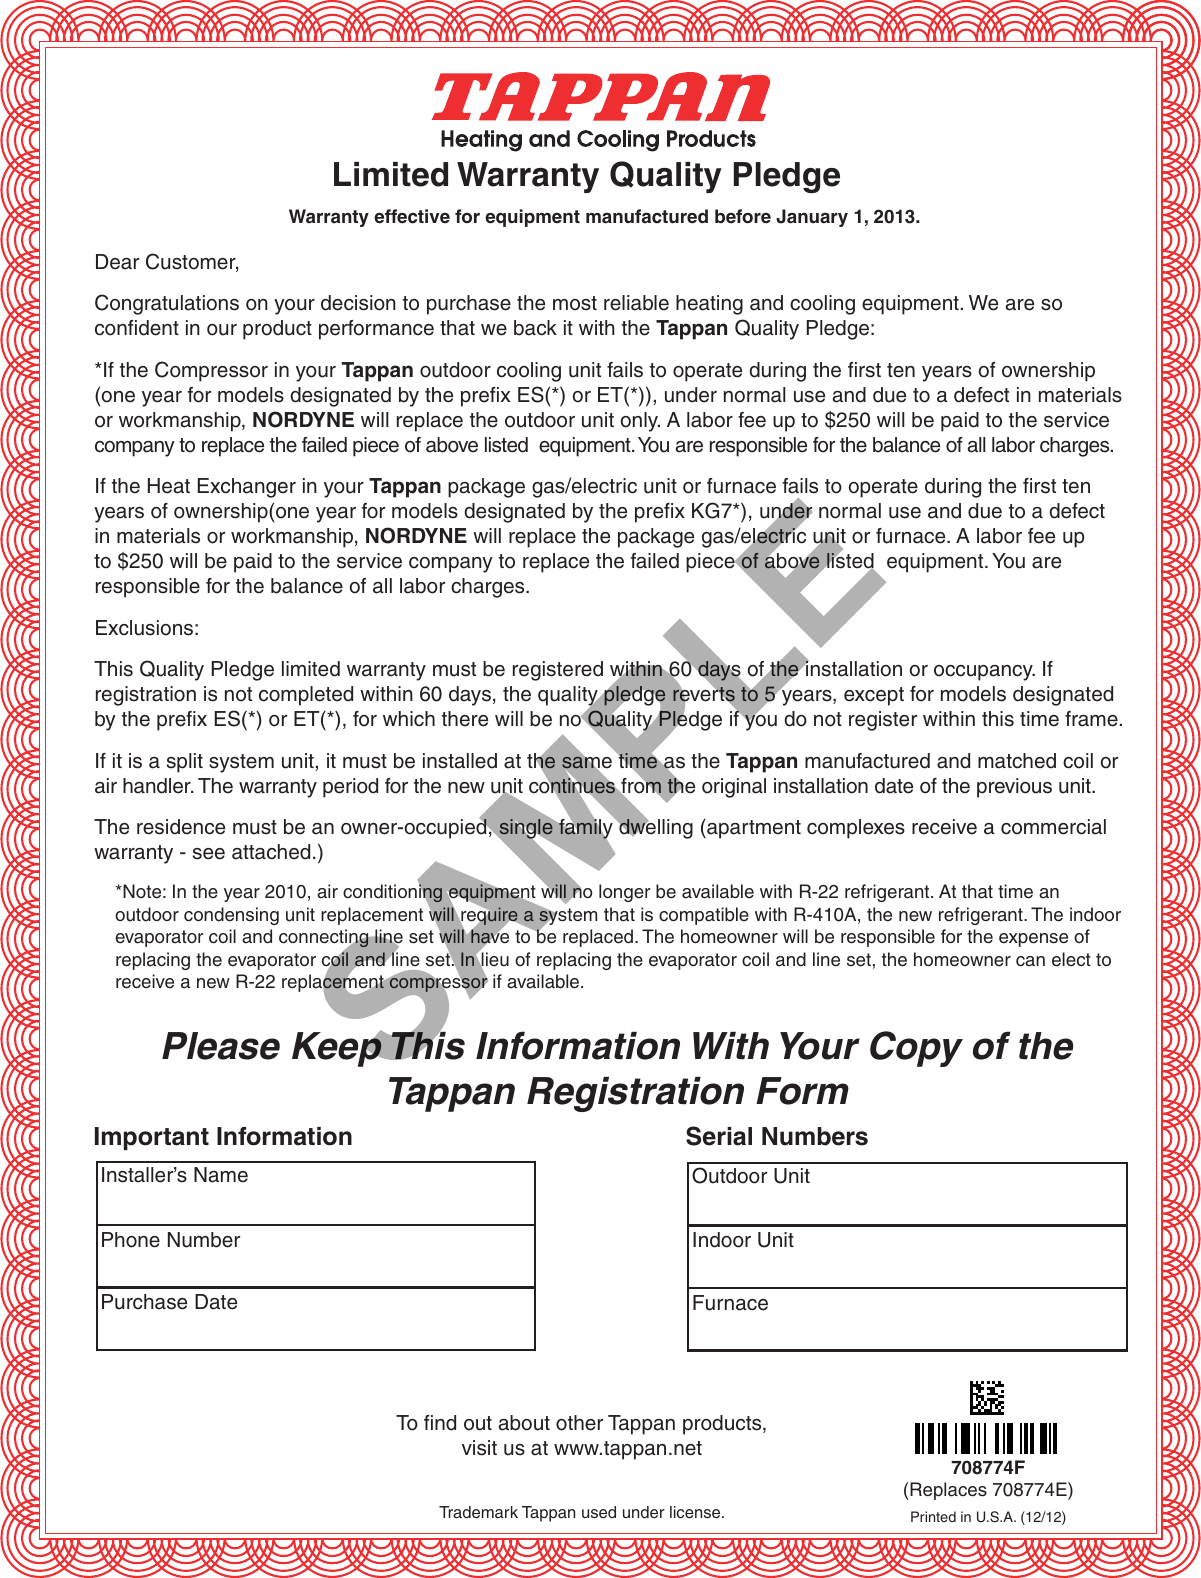 Page 5 of 8 - Tappan Limited Warranty